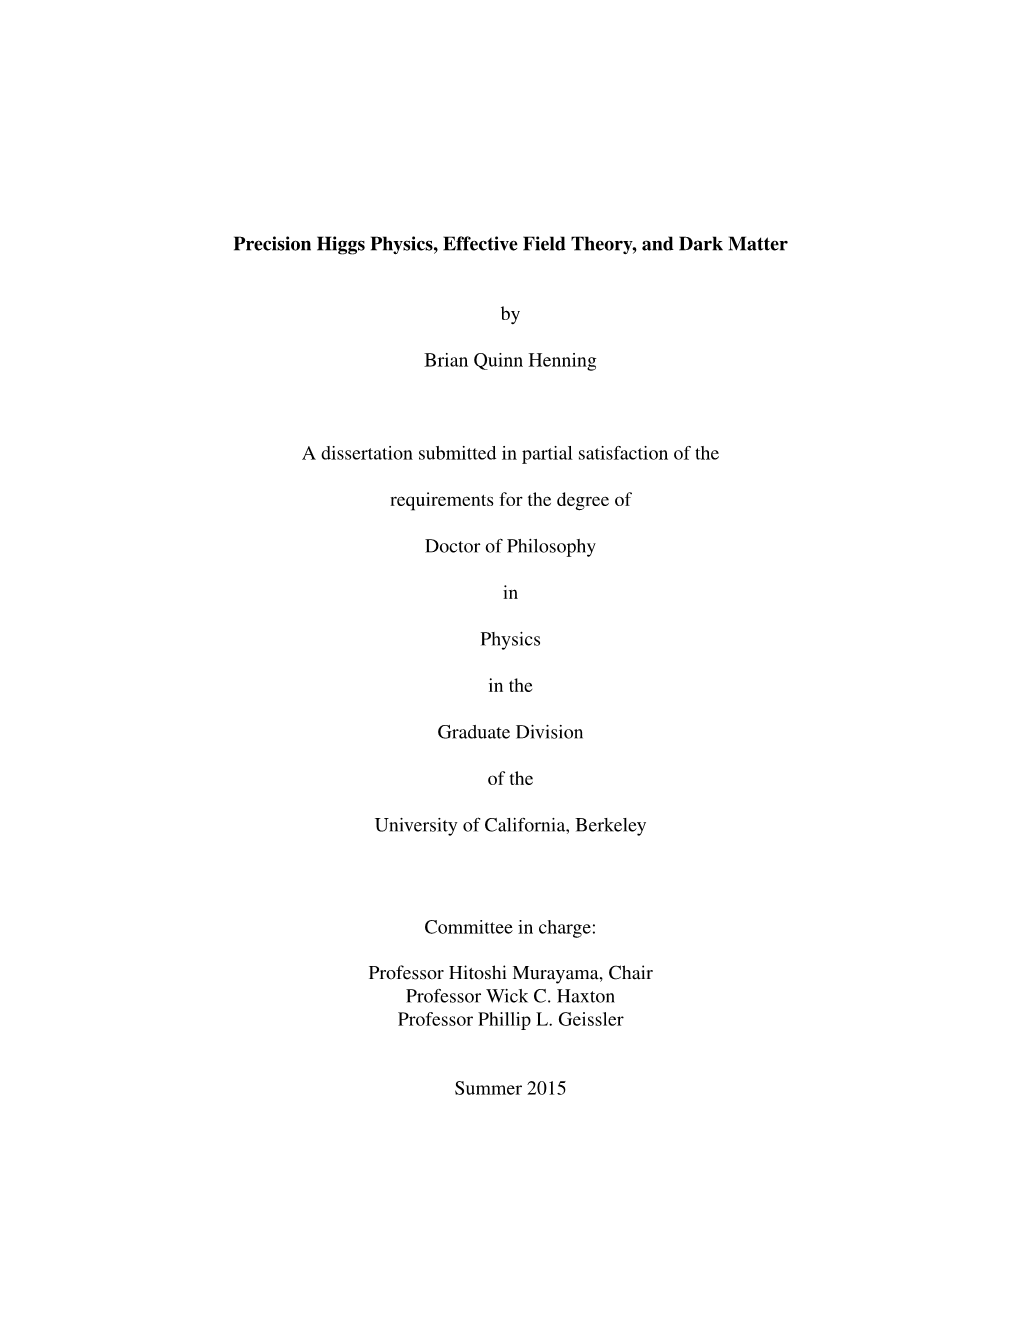 Precision Higgs Physics, Effective Field Theory, and Dark Matter By